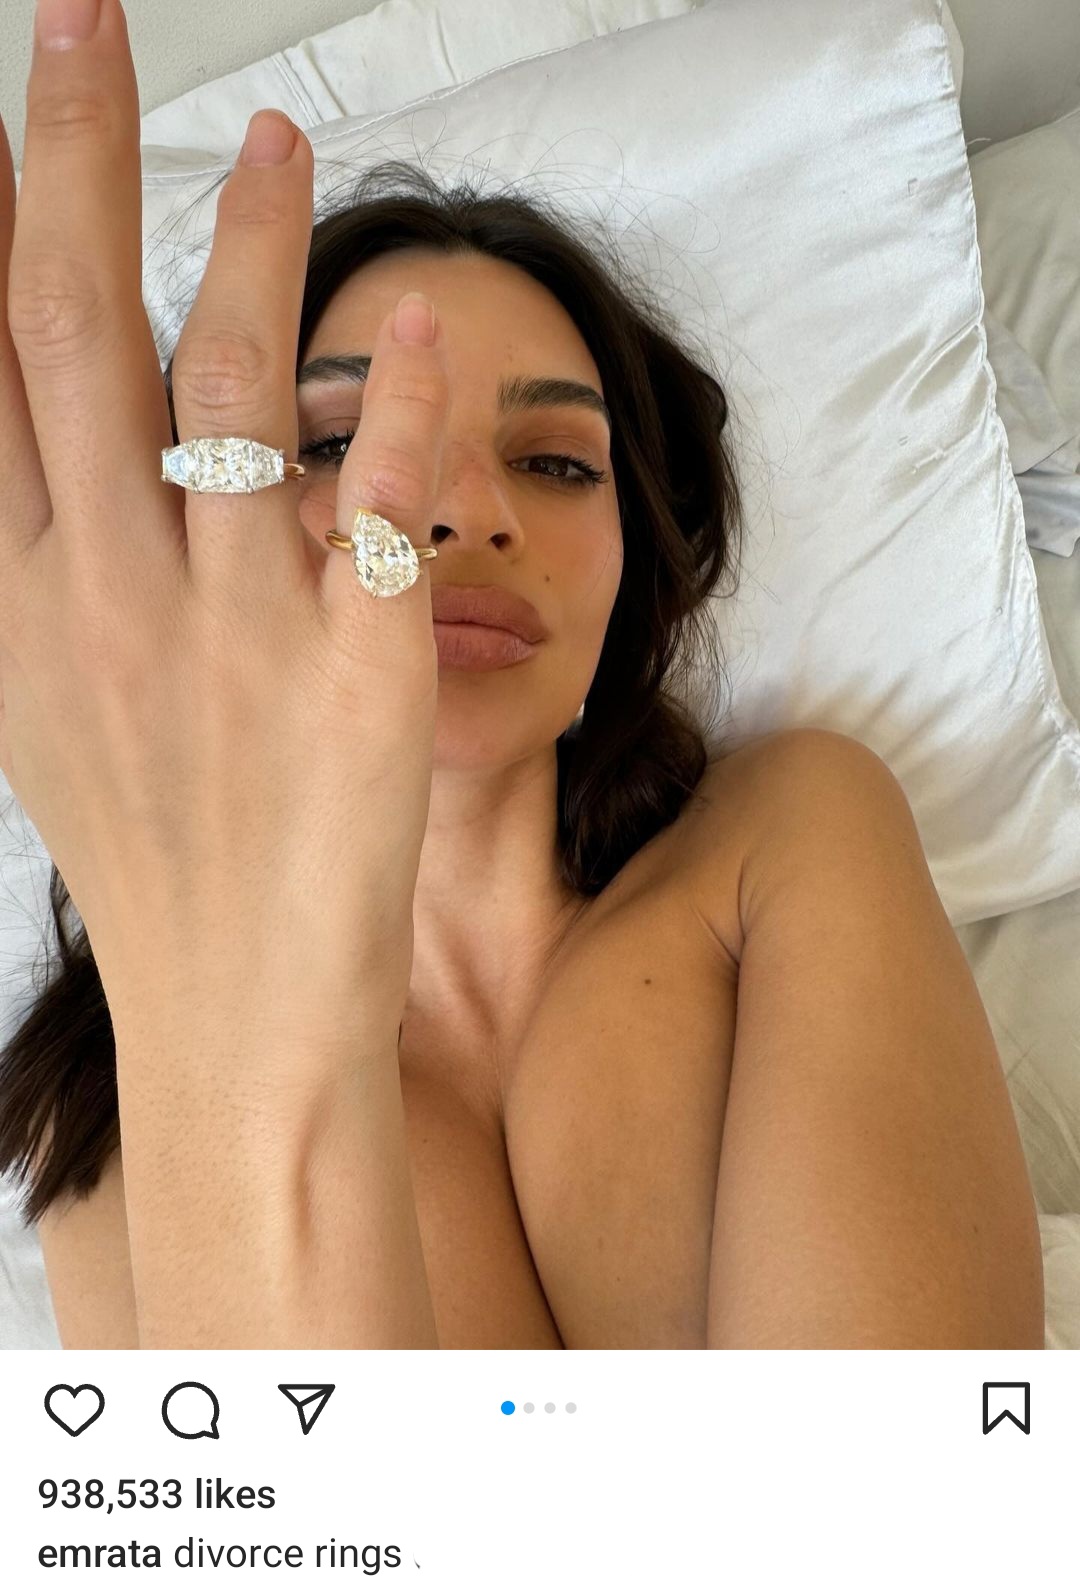 Model Emily Ratajkowski shows off her divorce rings which was created by splitting her engagement rings into two following split from ex-husband